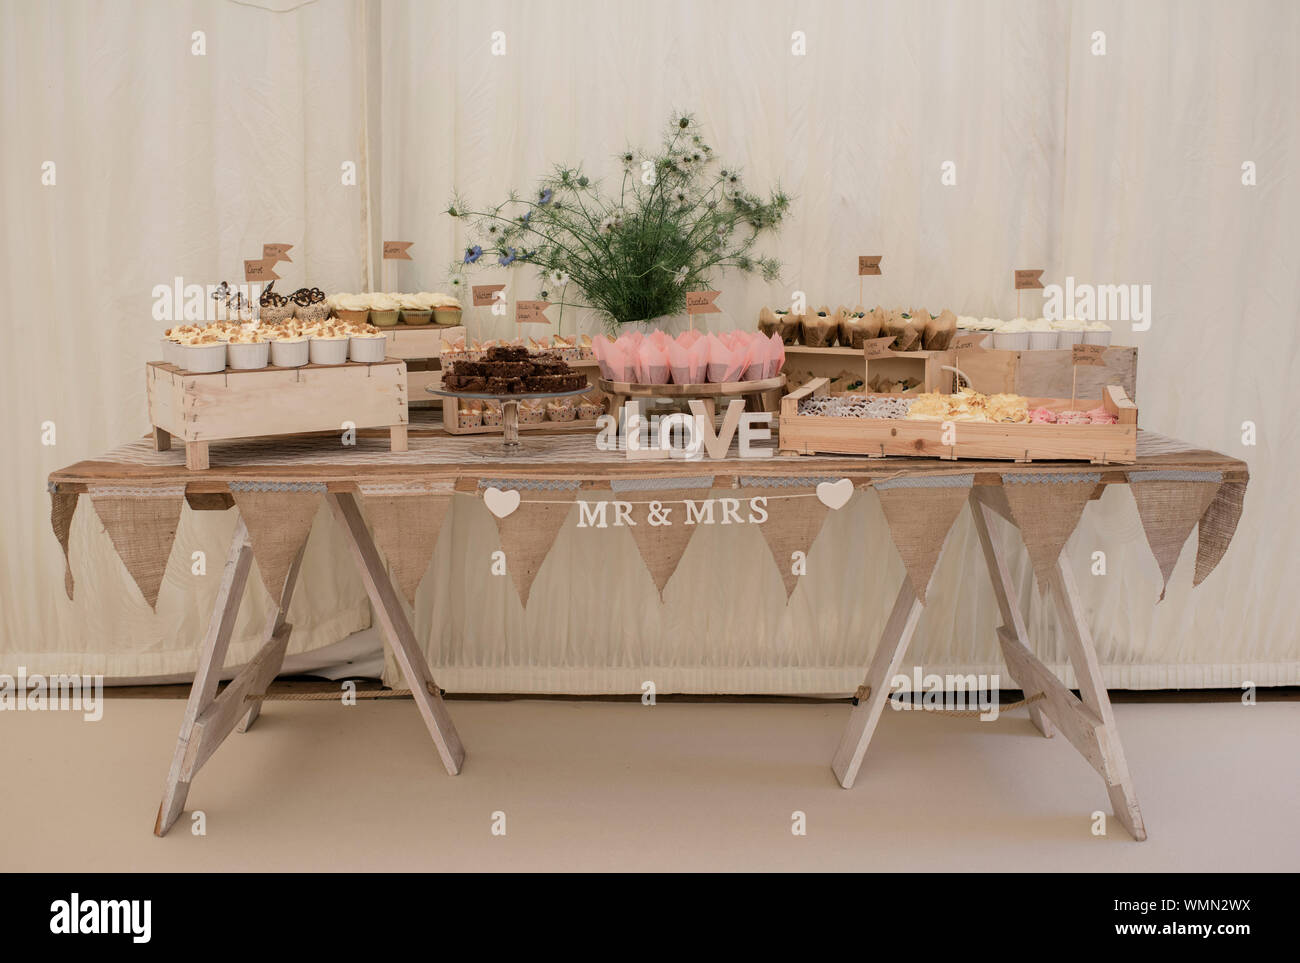 cupcakes and desert table for a wedding Stock Photo